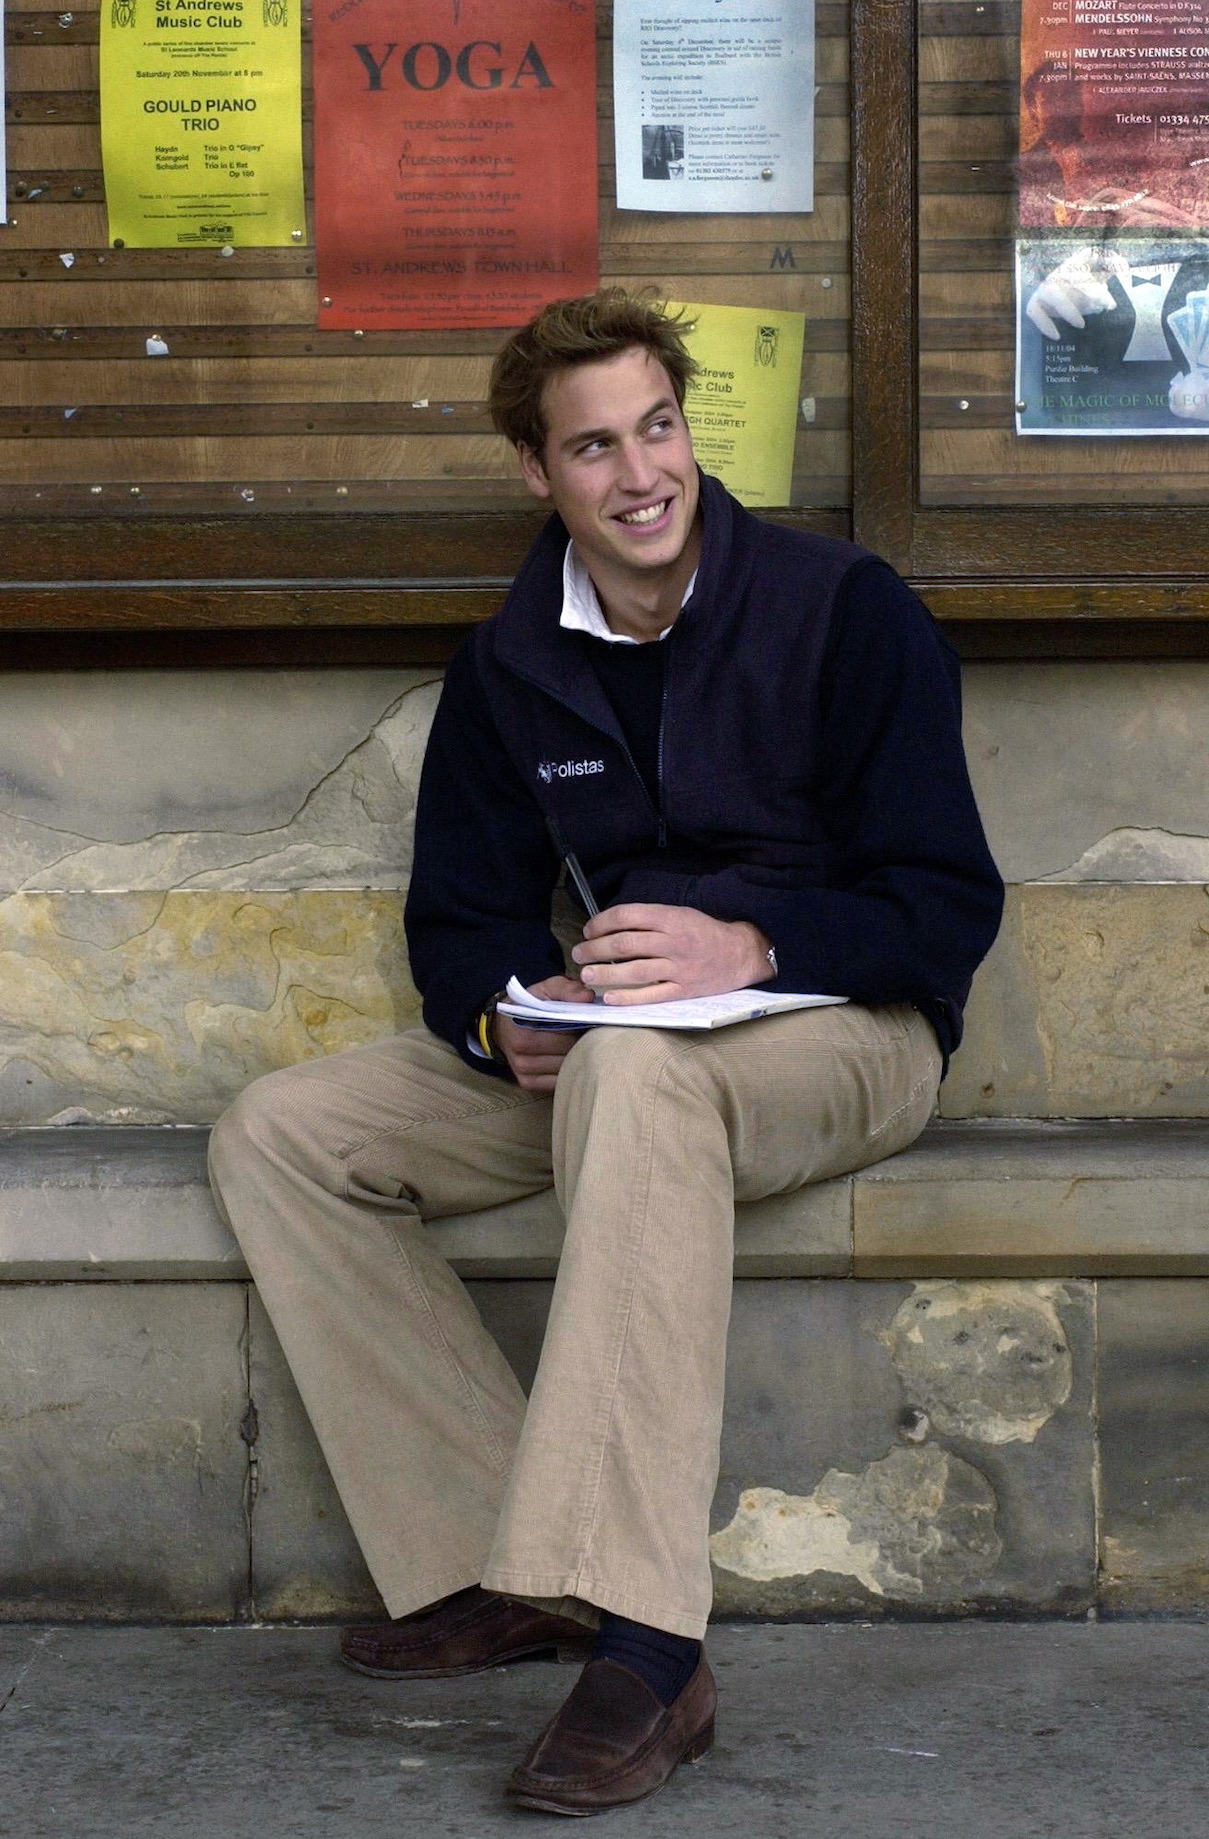 Prince William at the University of St. Andrews